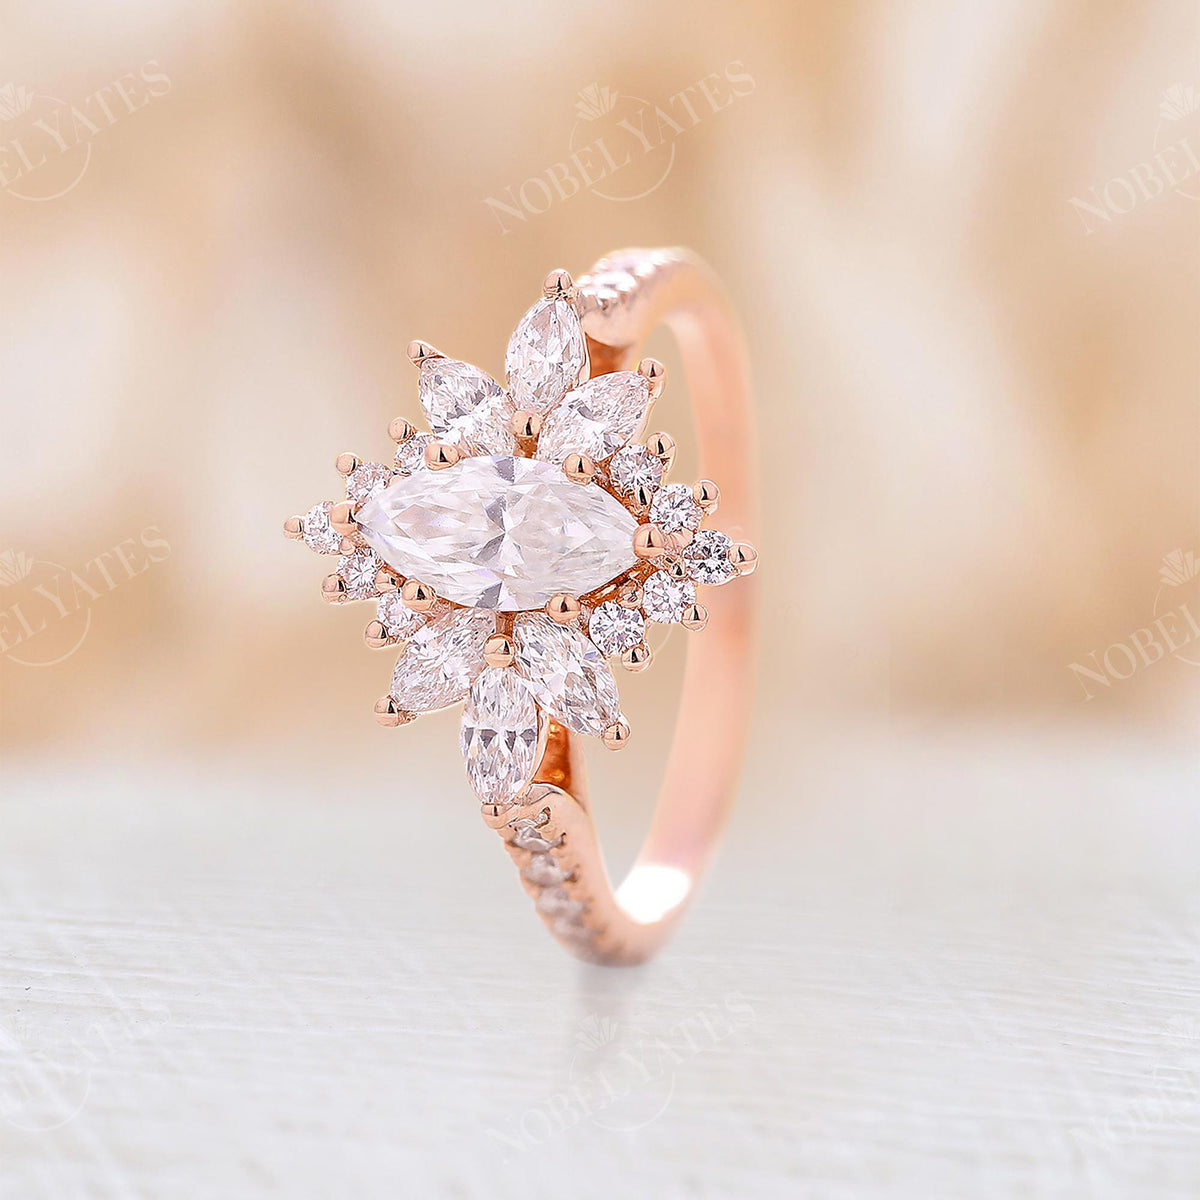 Vintage Marquise Moissanite Halo Engagement Ring Rose Gold